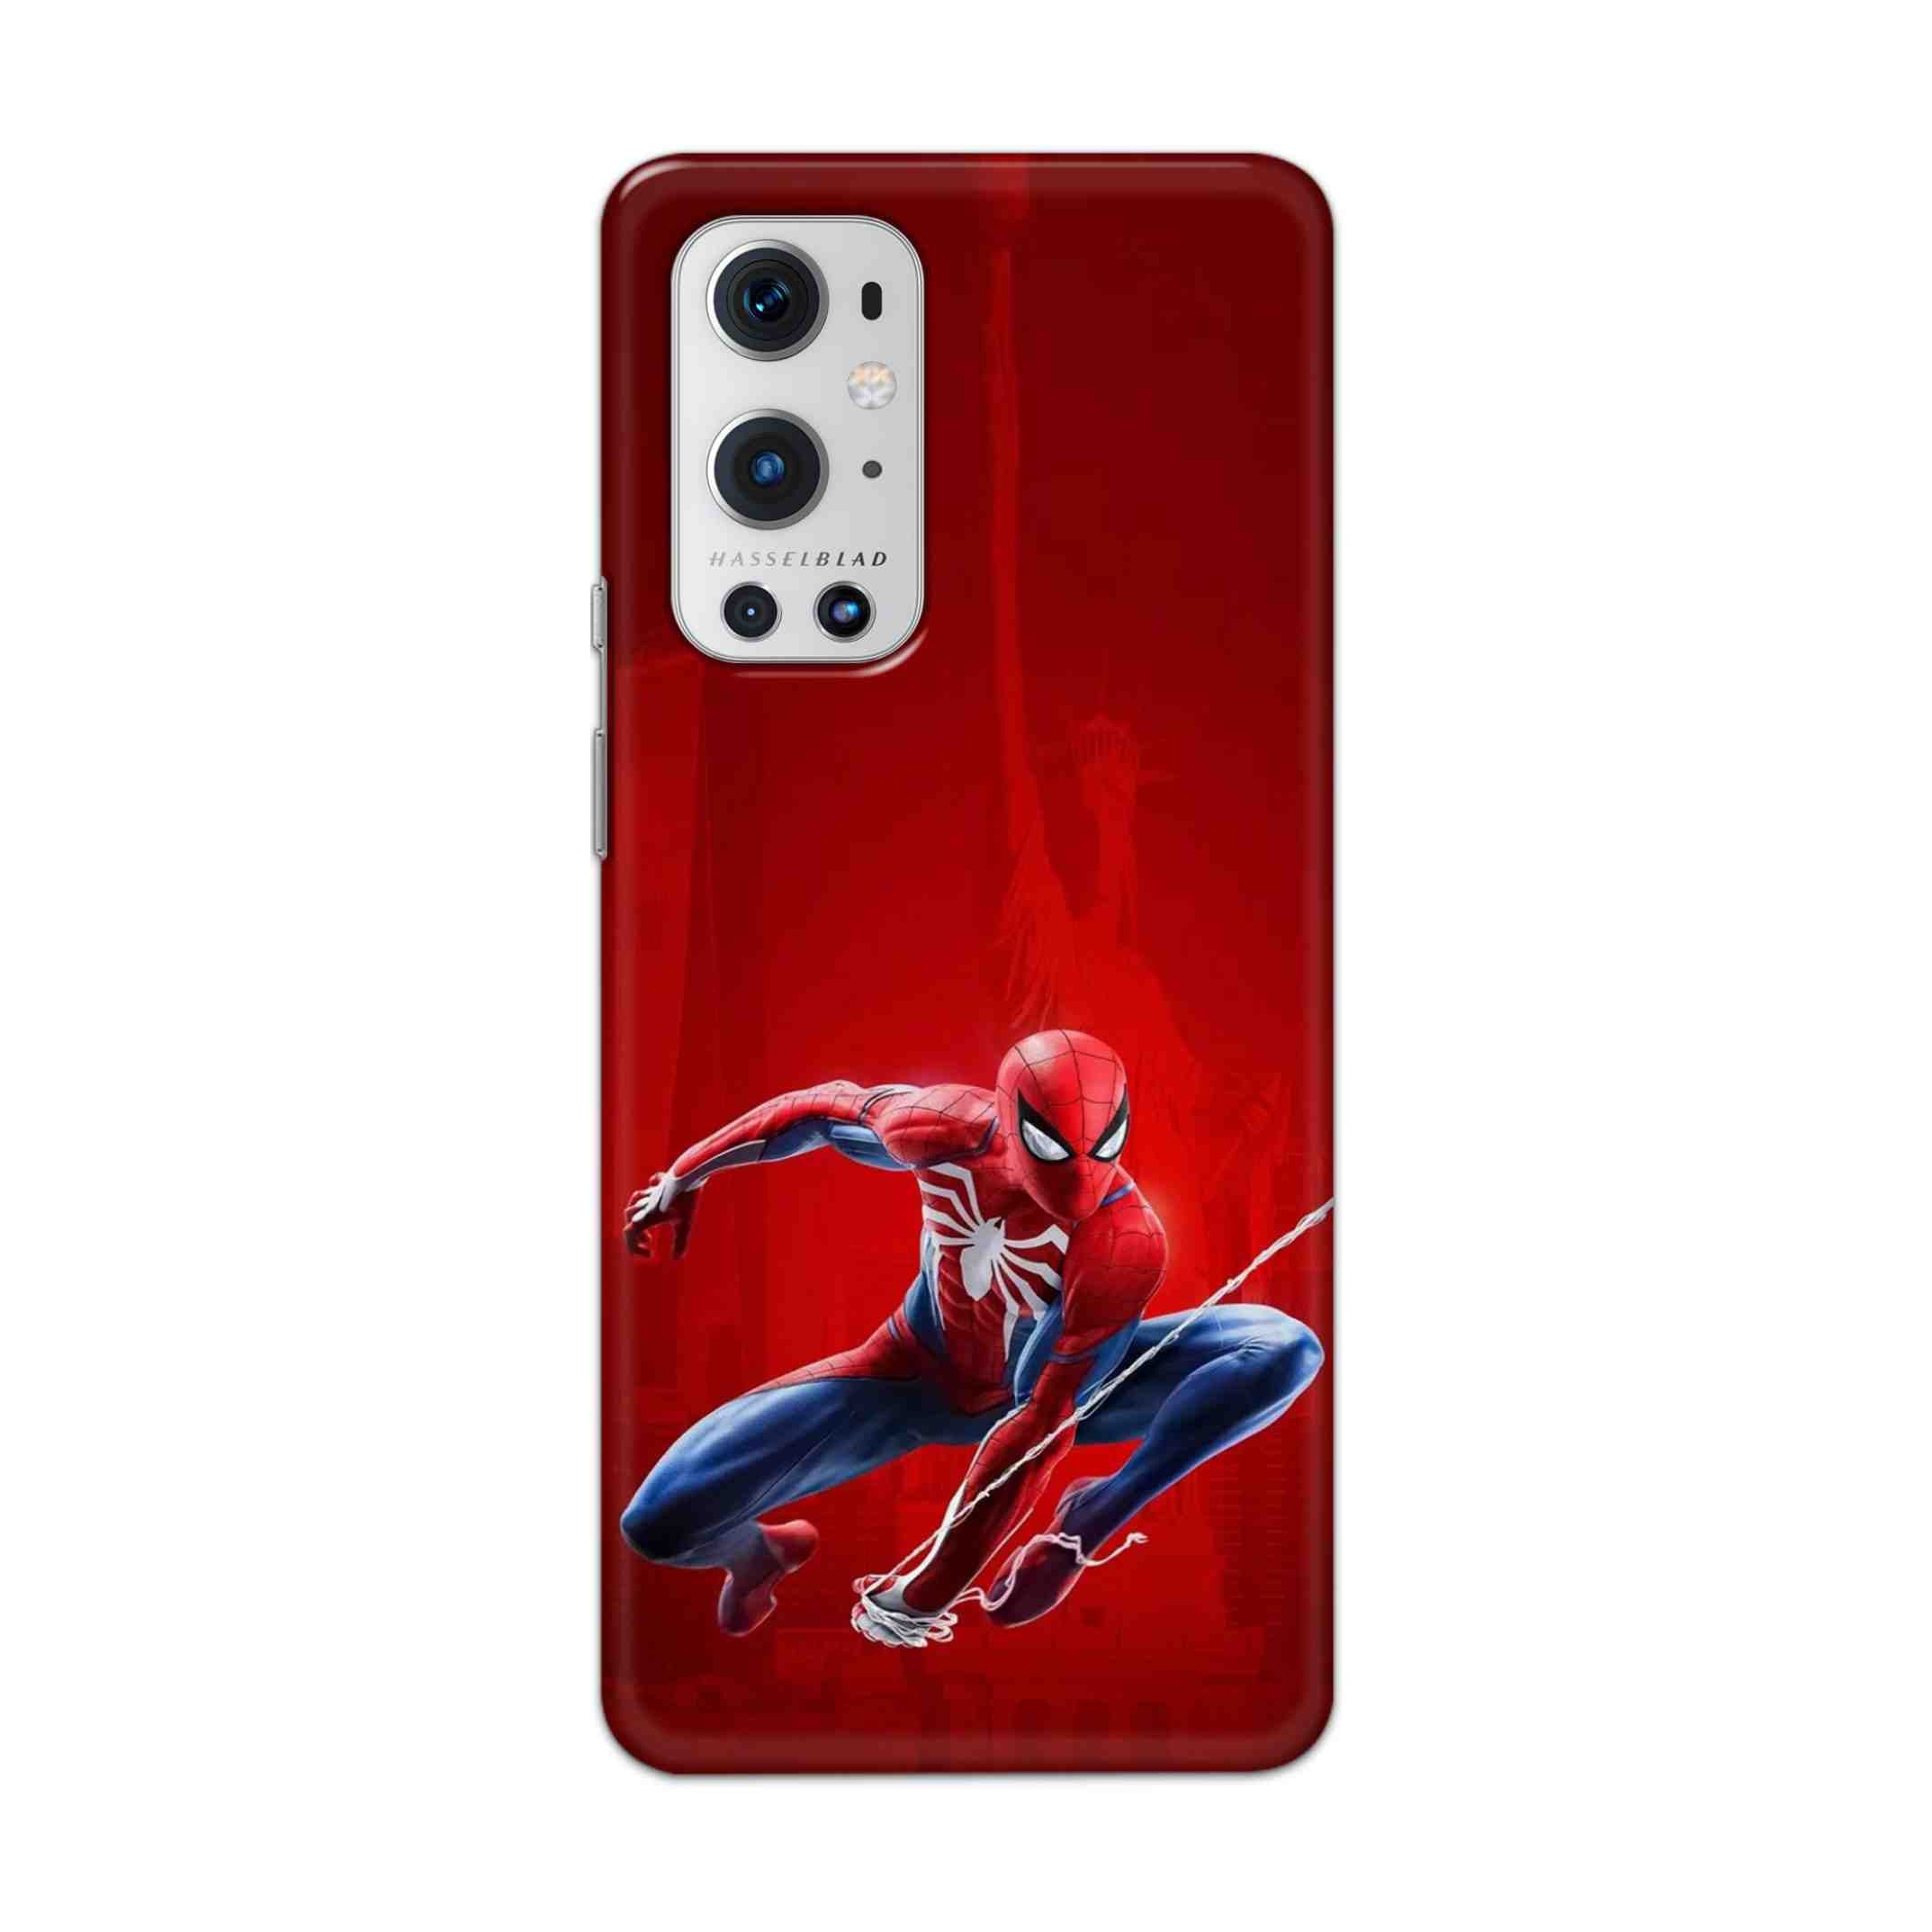 Buy Spiderman Hard Back Mobile Phone Case Cover For OnePlus 9 Pro Online